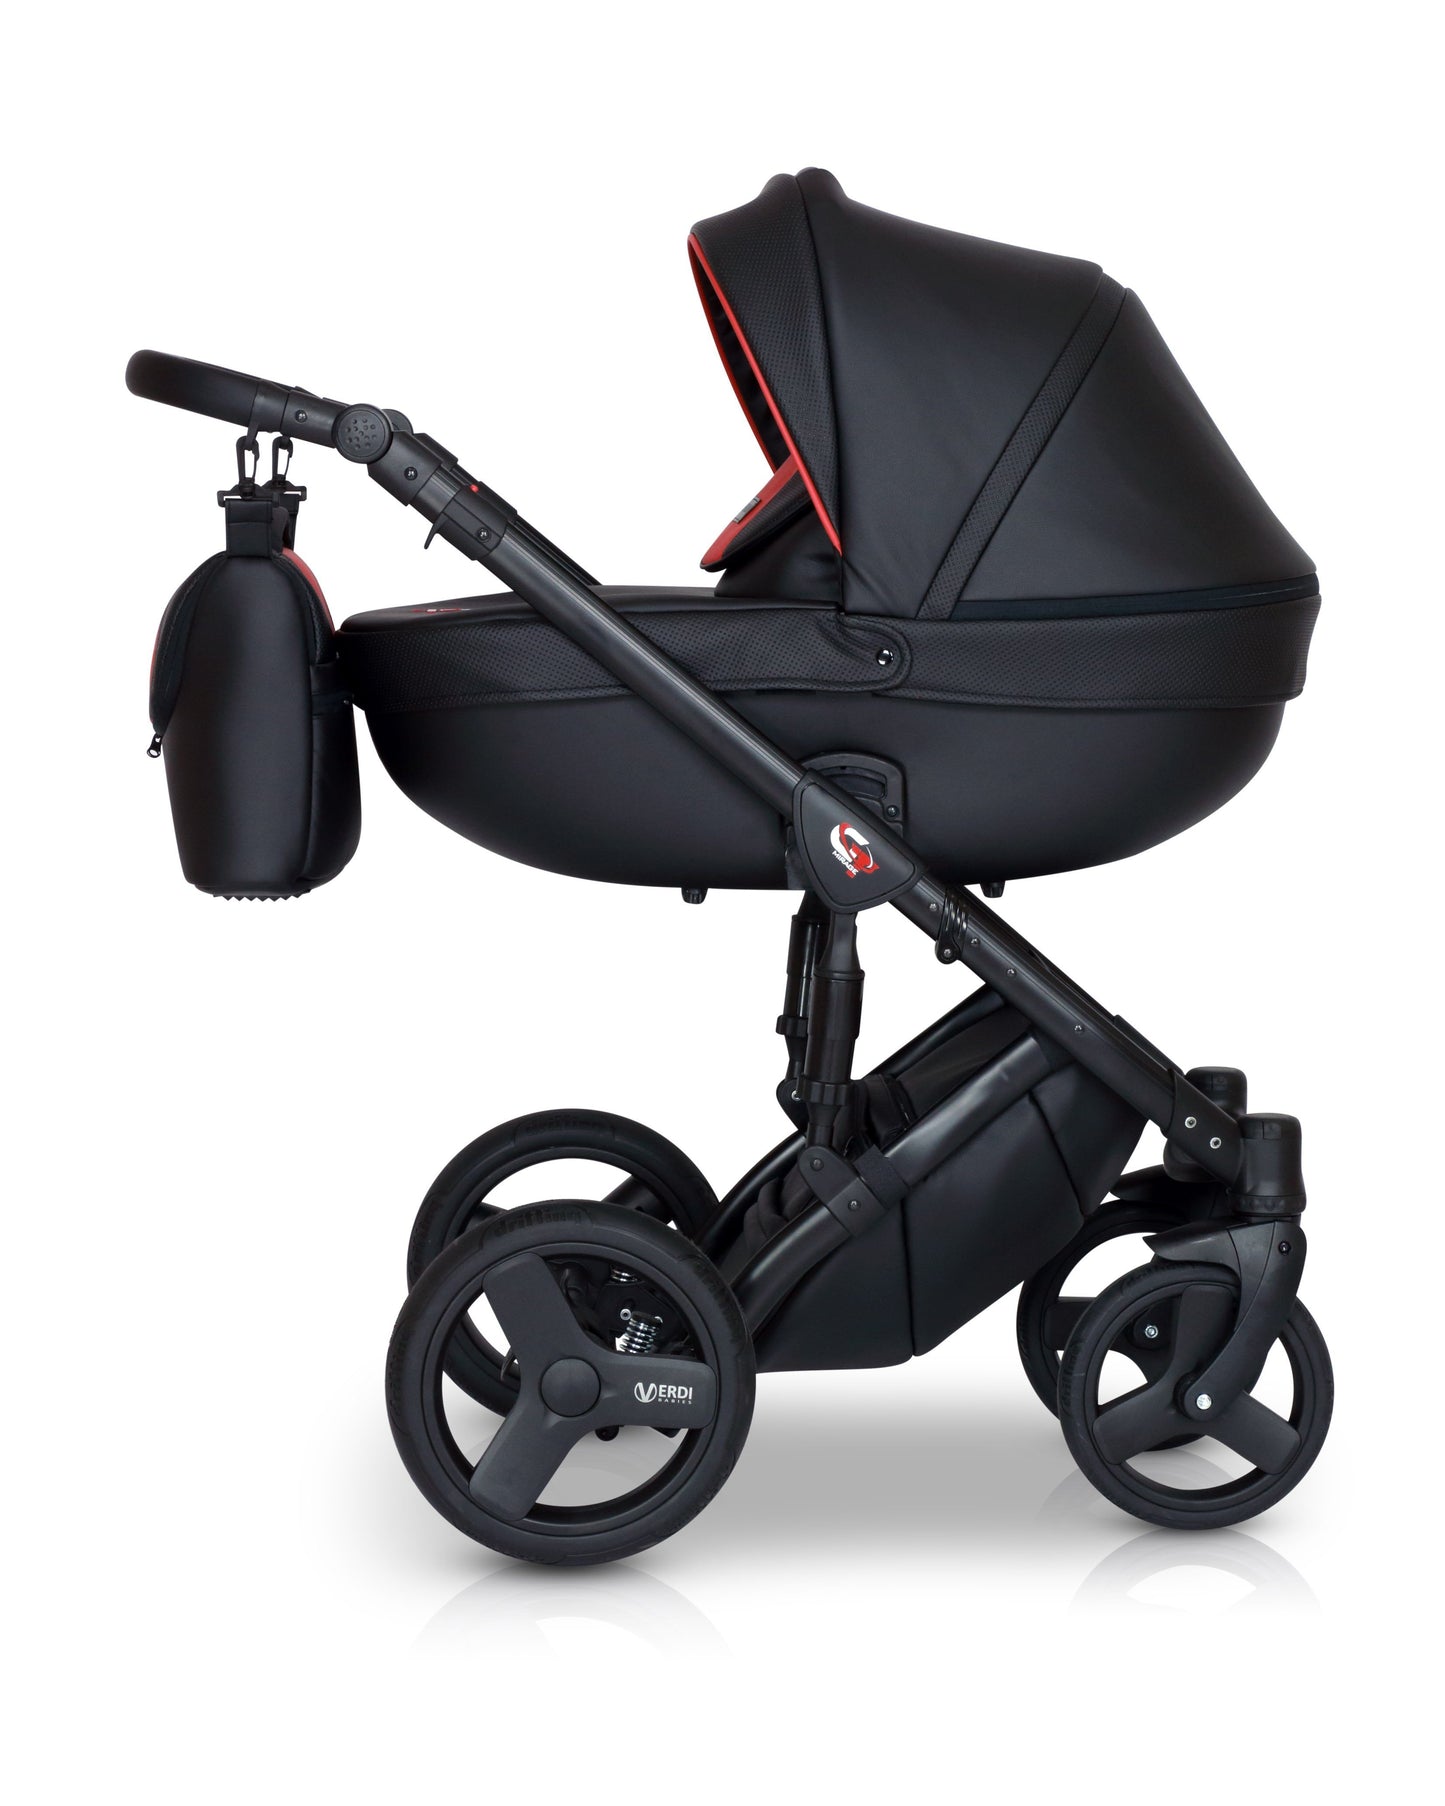 3 in 1 Pushchair in black and red | carrycot for newborn baby